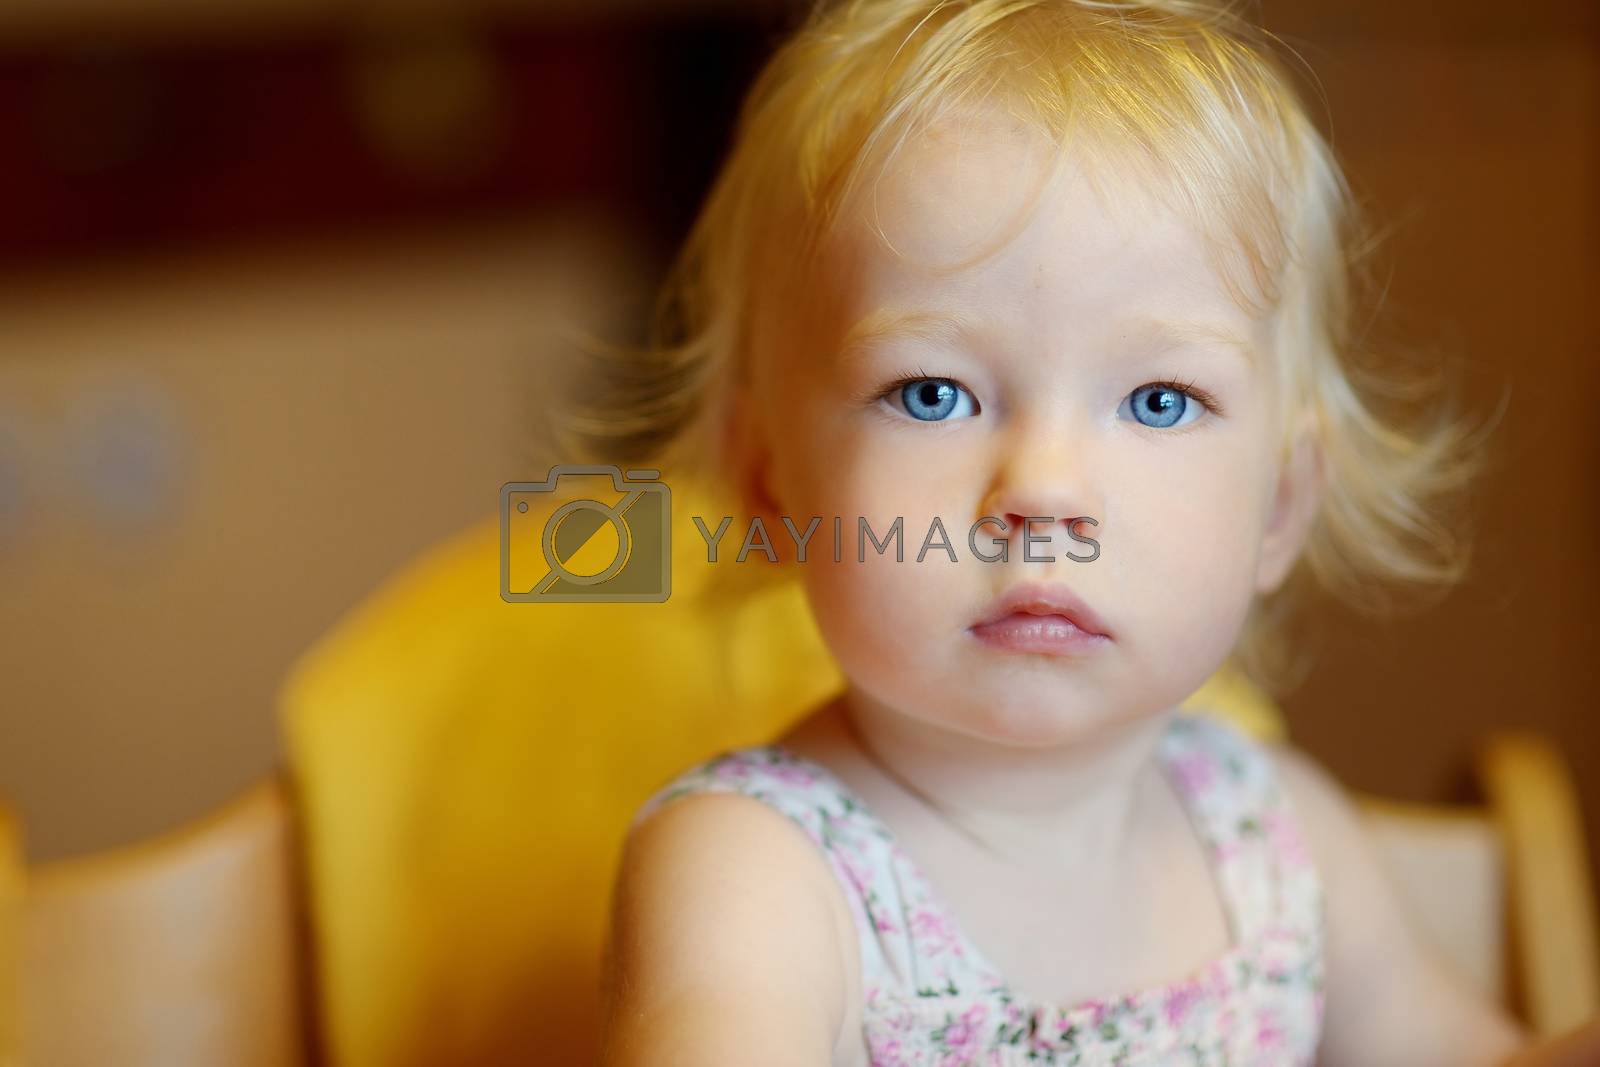 Royalty free image of Adorable little girl portrait by maximkabb